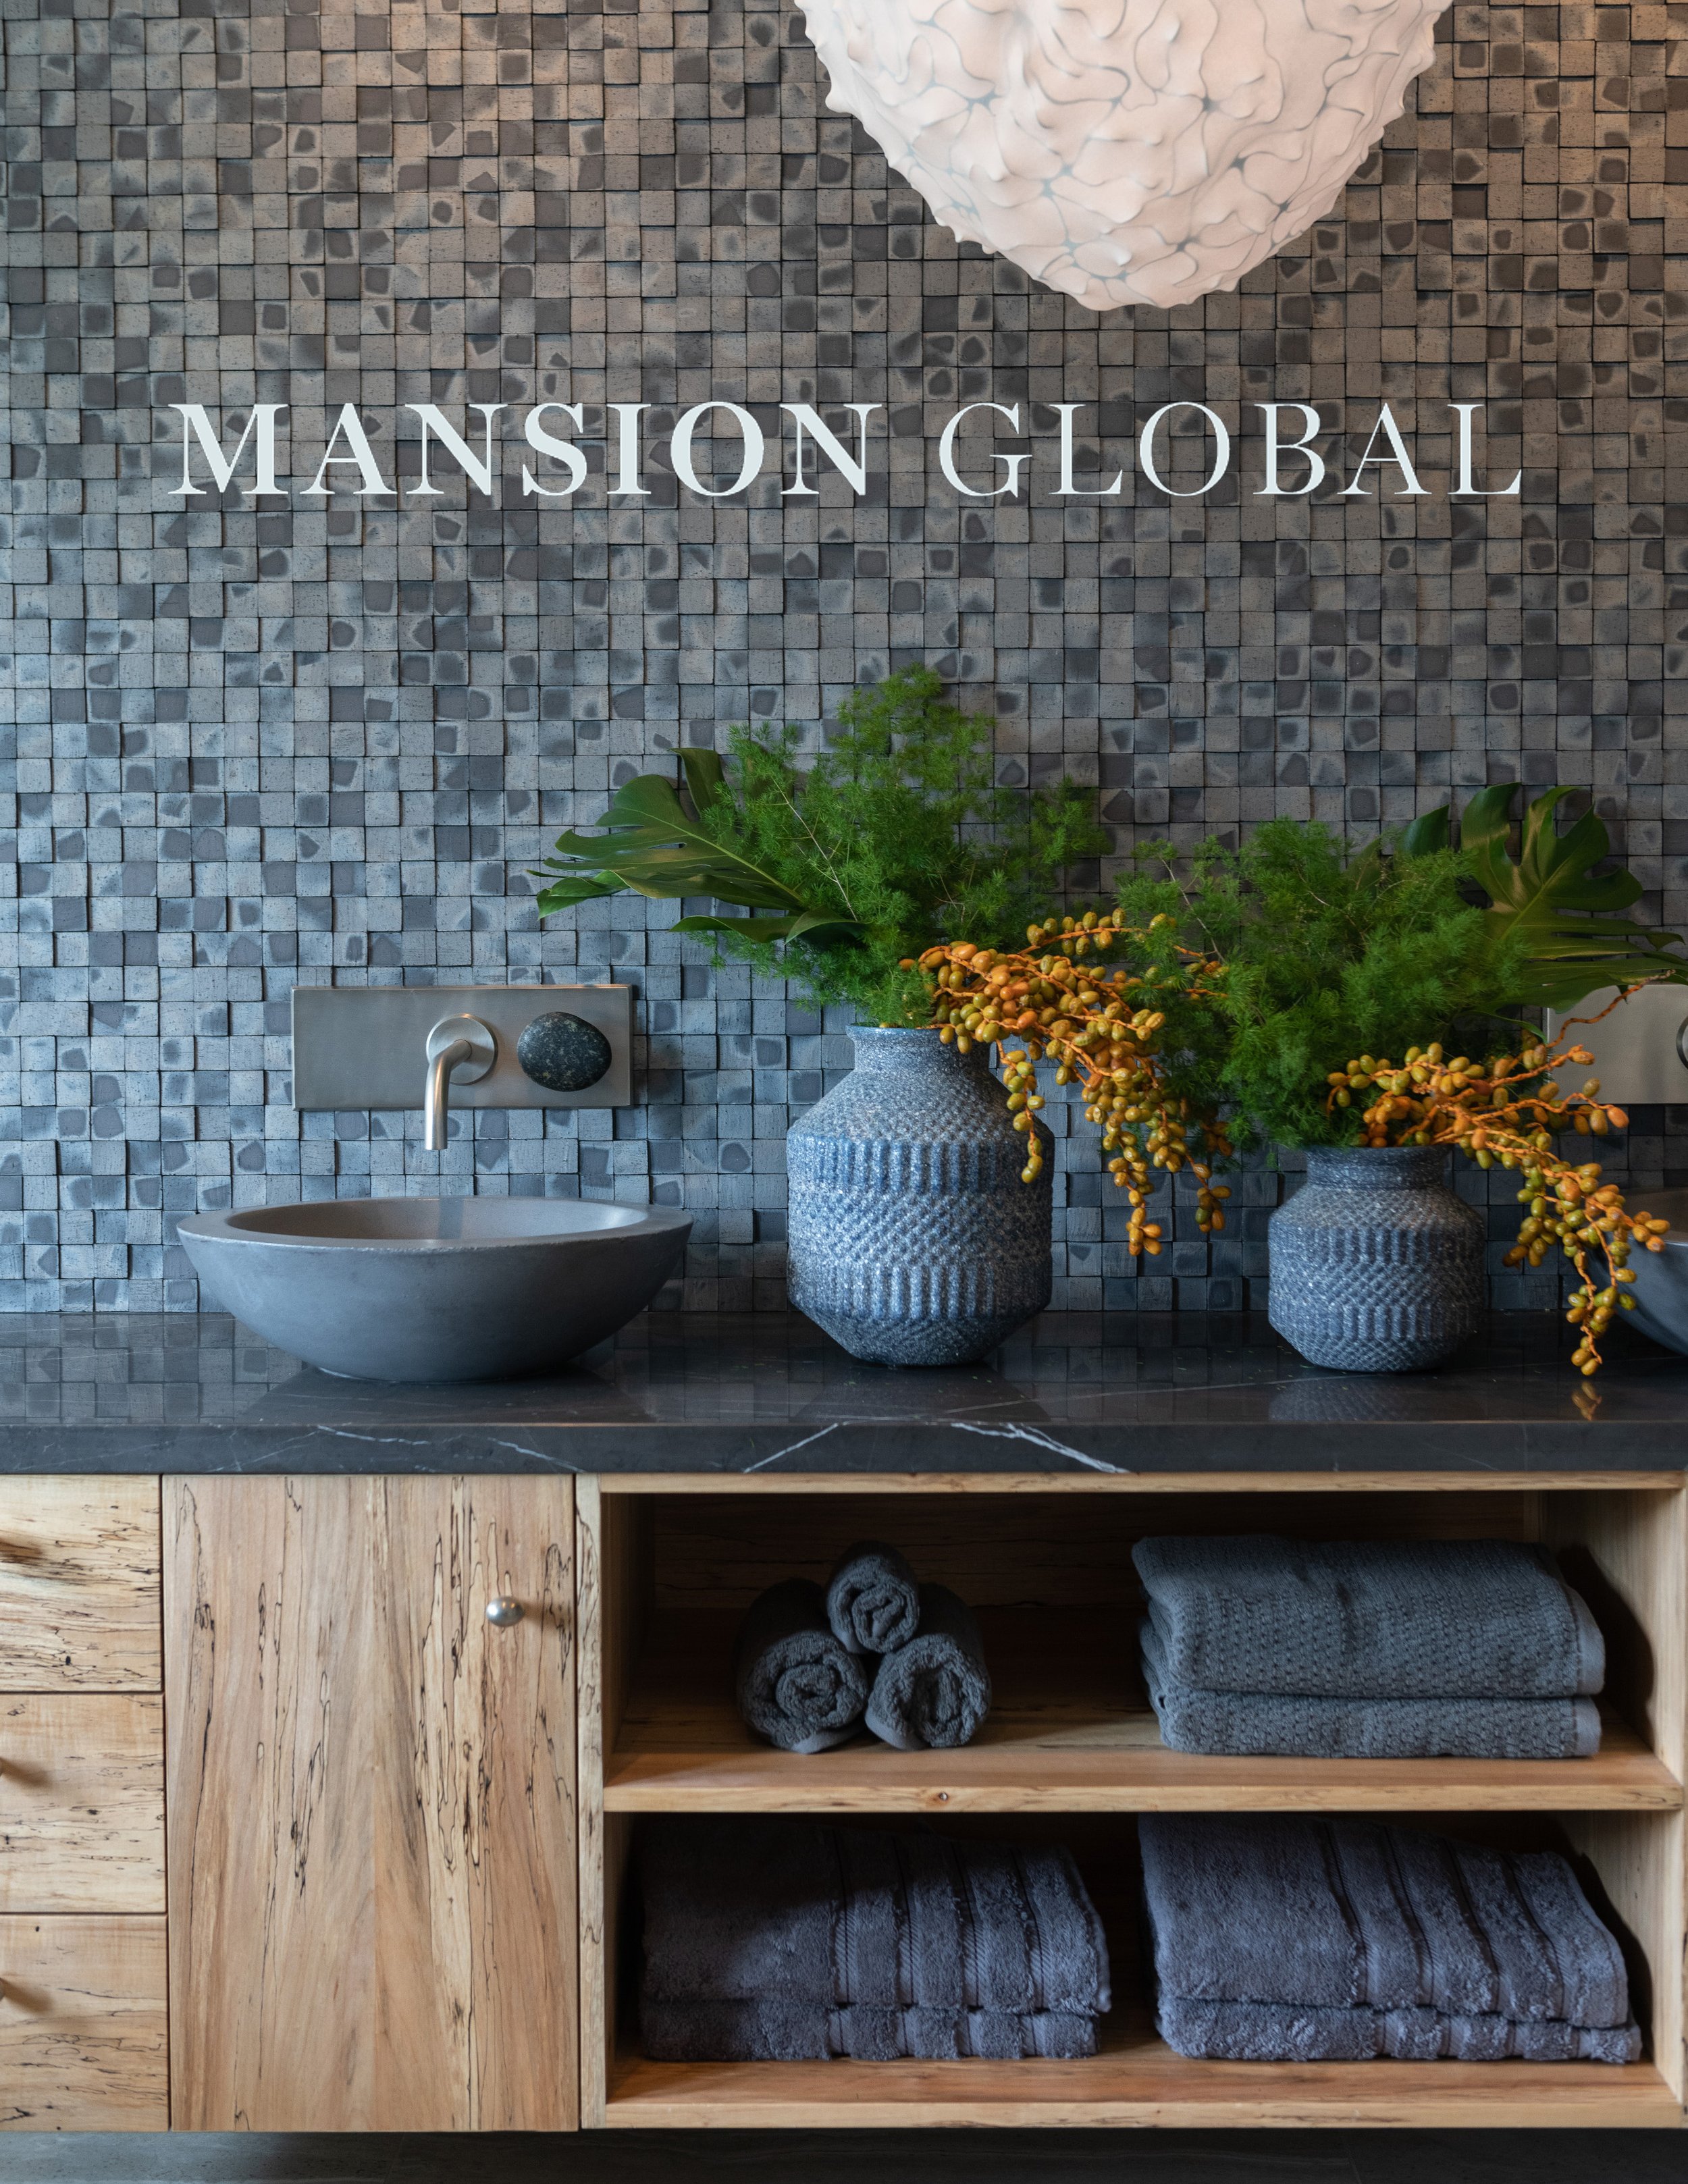  Mansion Global Article where Sarah Barnard discusses her practice and inclusive design.  